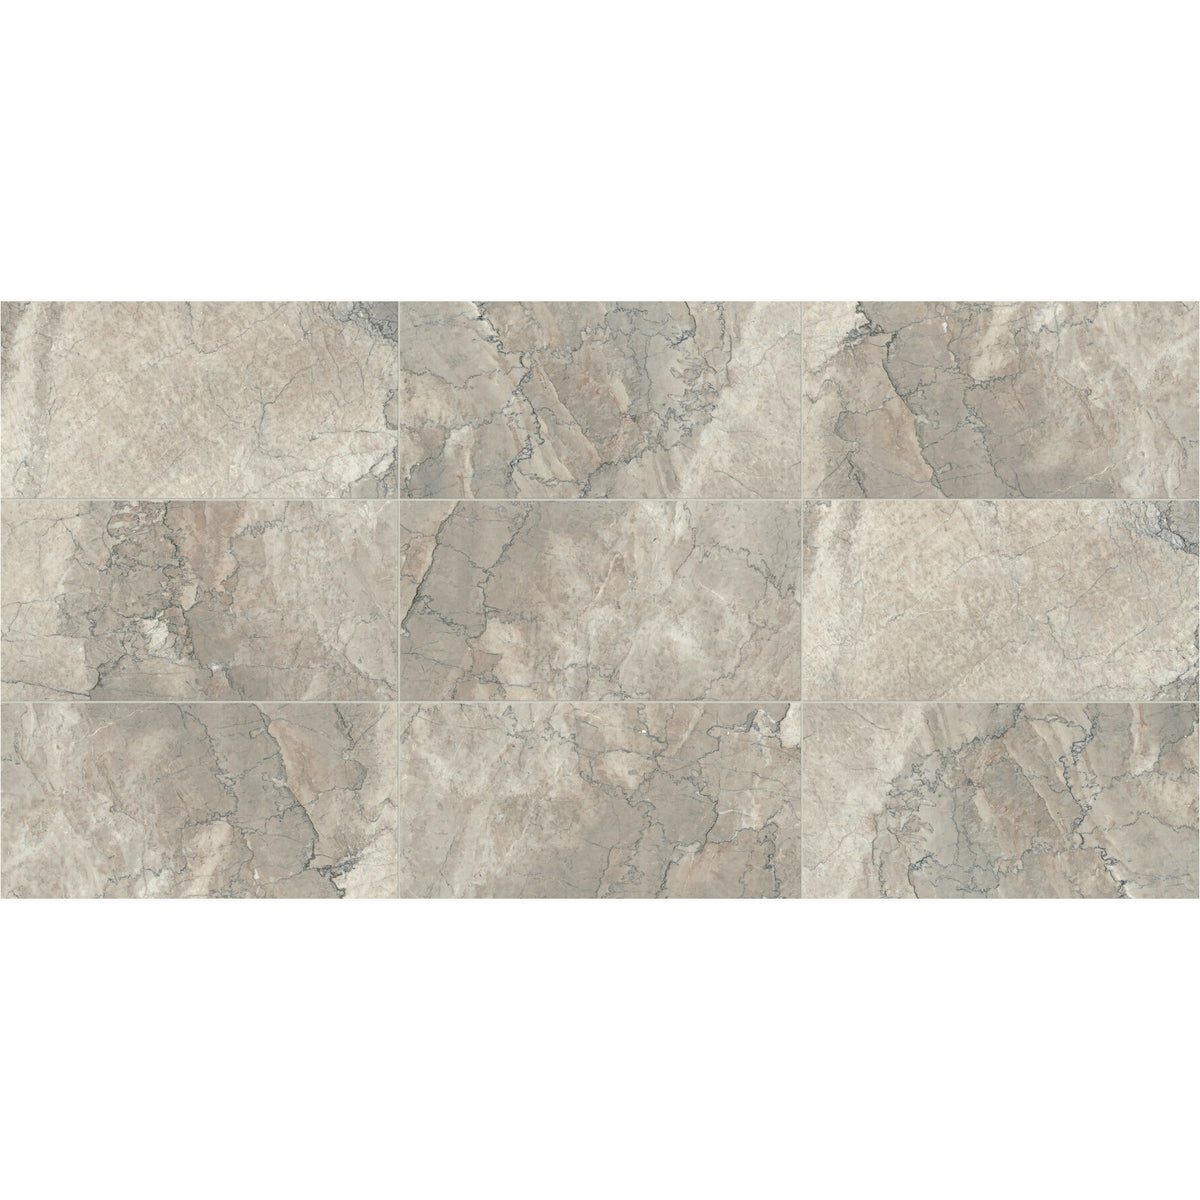 Daltile - Parksville Stone 12 in. x 24 in. - Bengali Temple